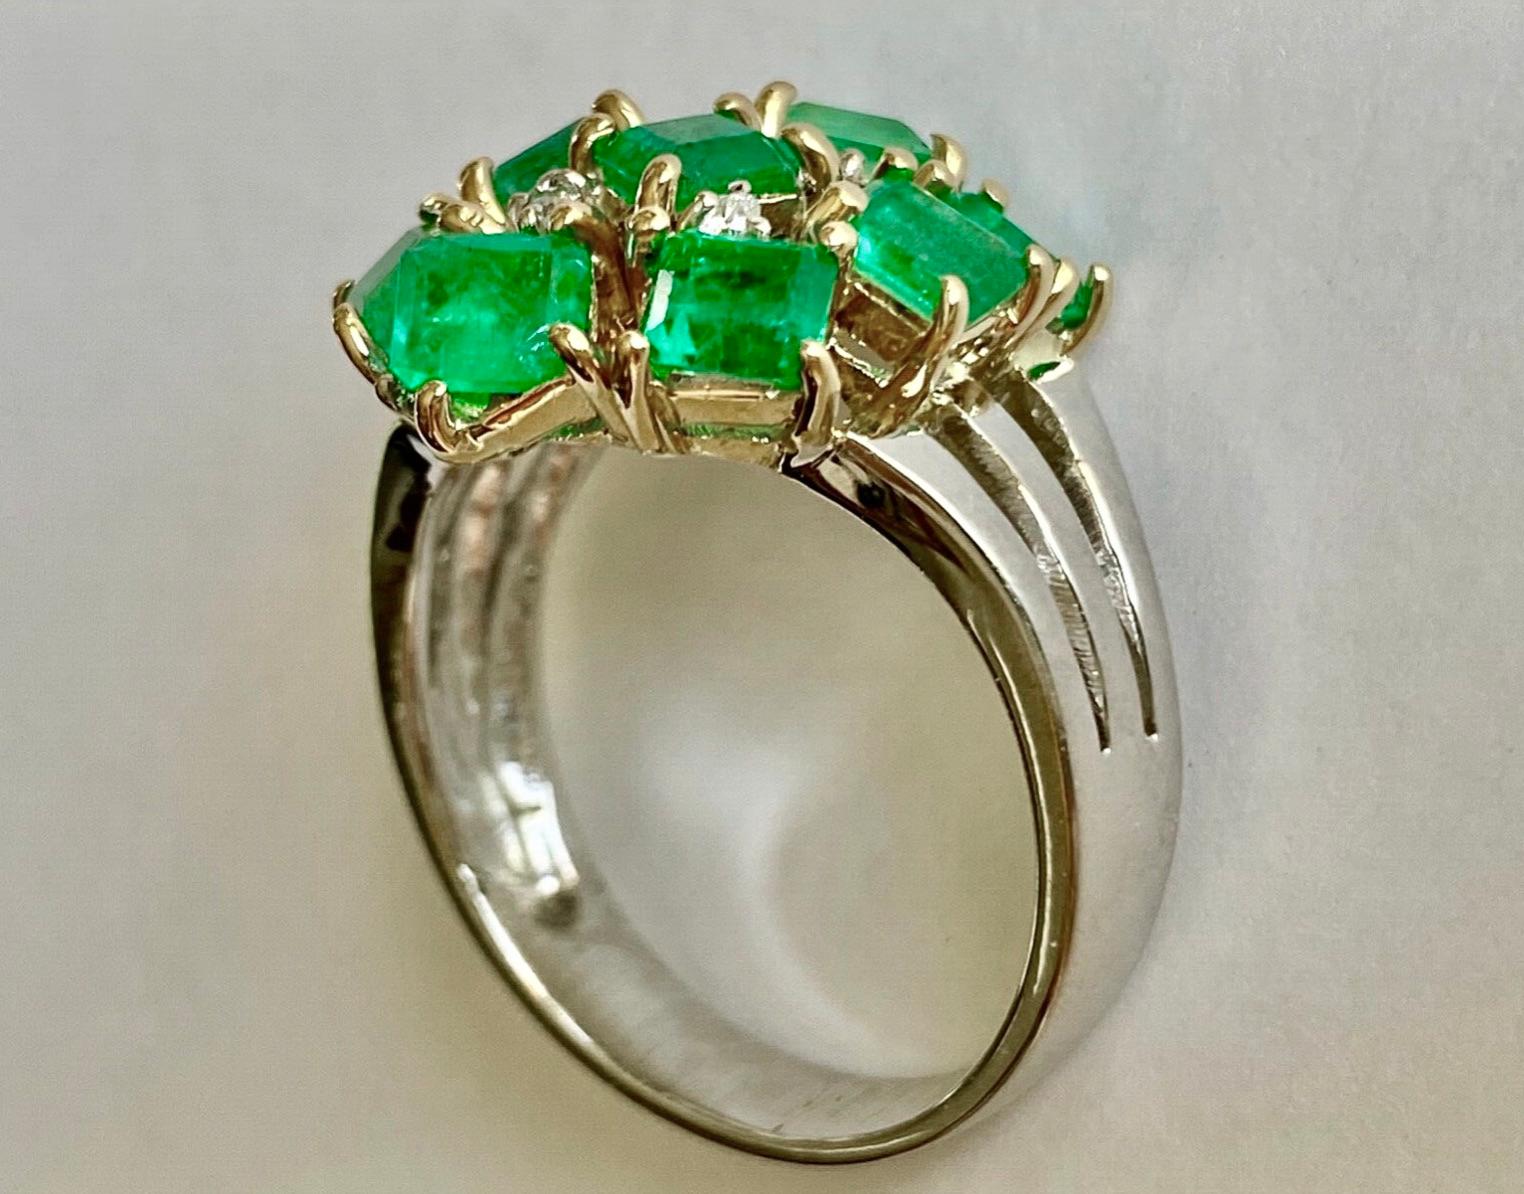 Estate Retro style 4.20 carats natural Colombian emerald, emerald cut, cluster cocktail ring 18K yellow gold handmade setting from our Workshop.
Primary Stone: Natural Colombian Emerald
Shape or Cut: Mix Cut 
Approx Emerald Weight: Over 4.00 Carat